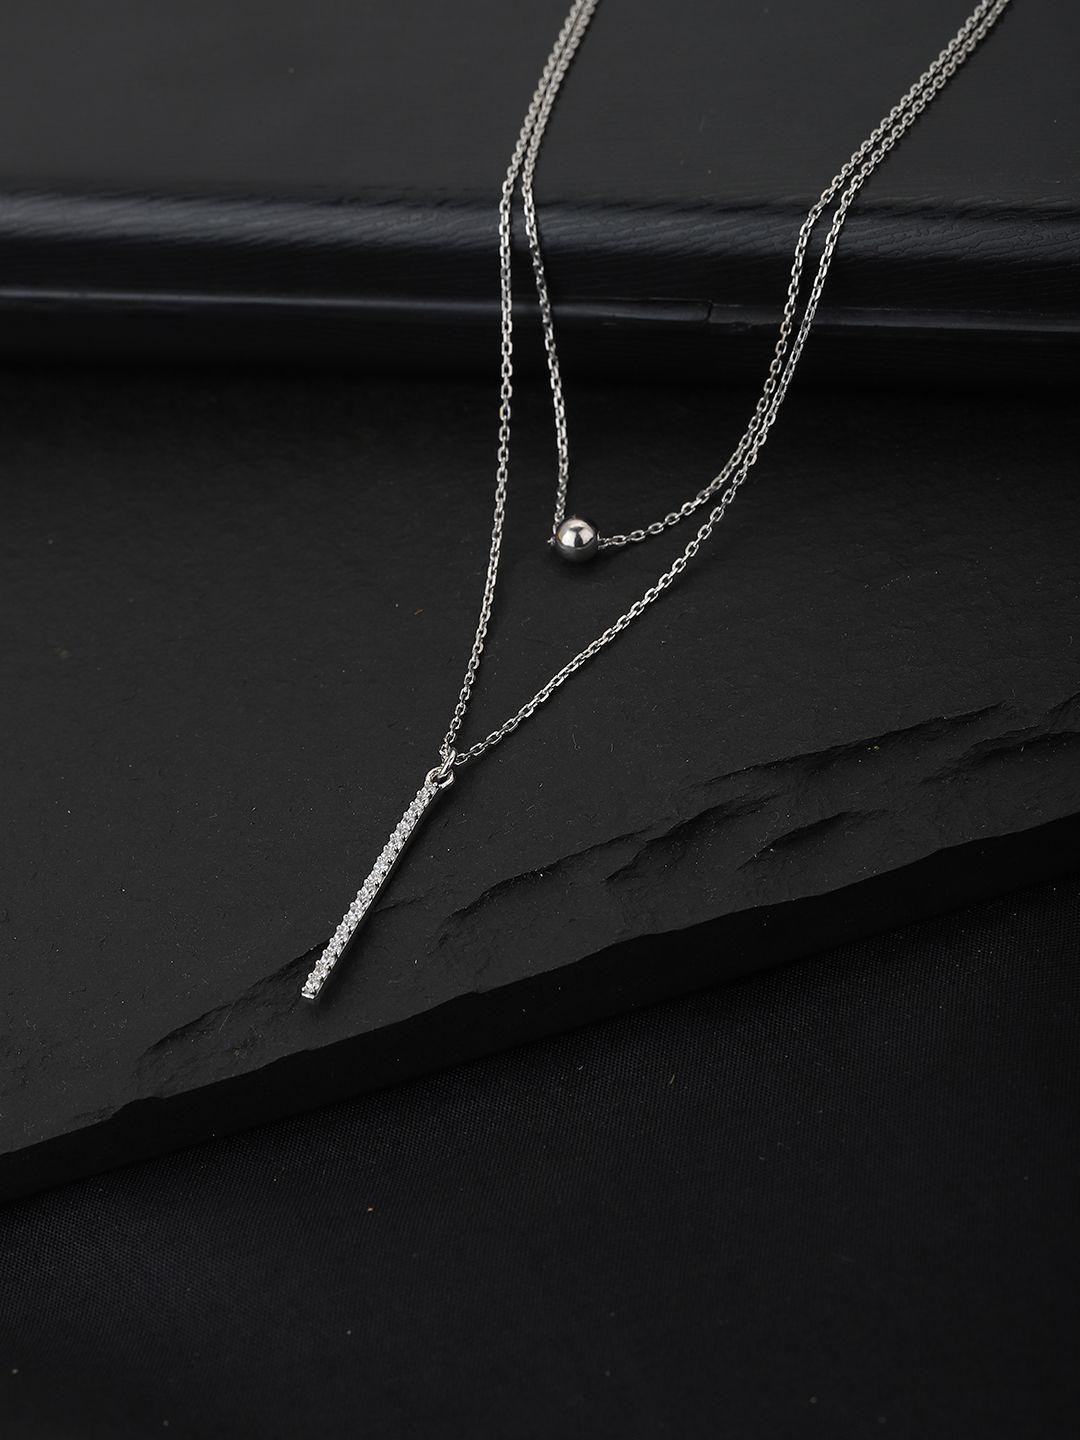 carlton london silver-toned rhodium-plated cz studded layered lariat necklace